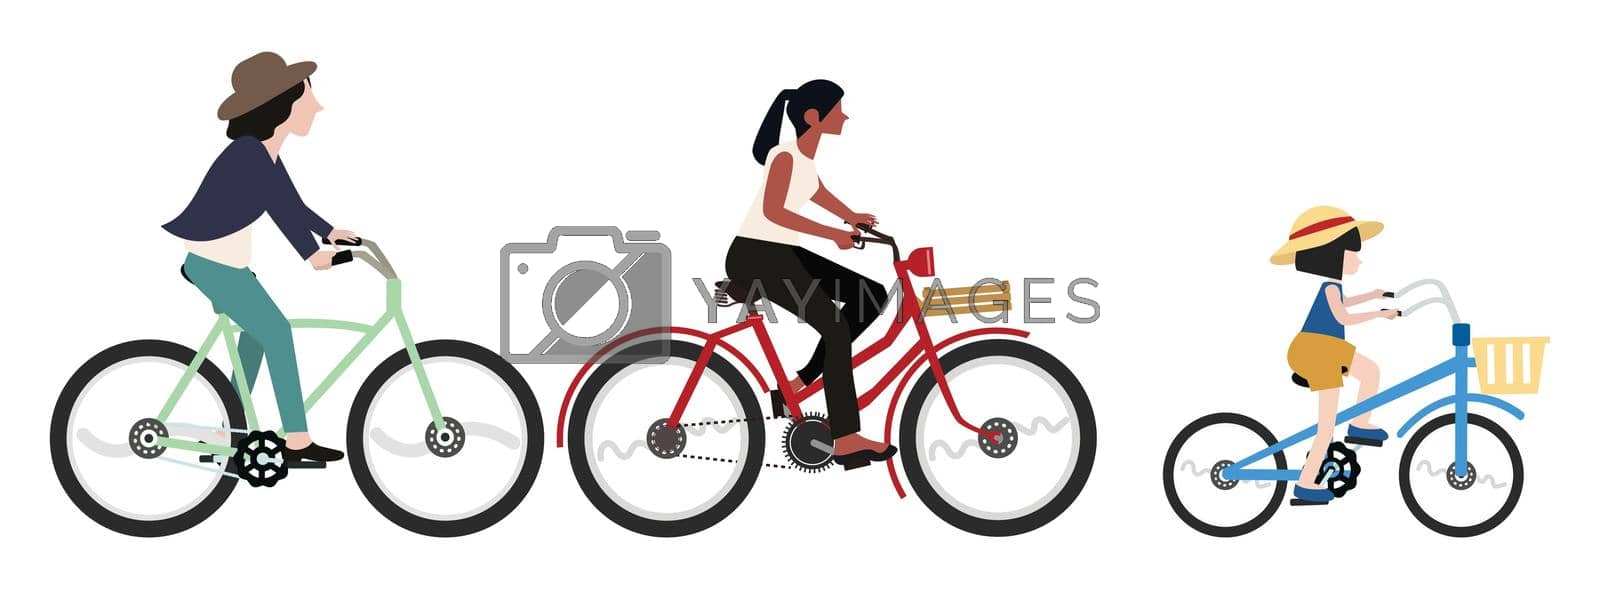 People riding a various bikes vector